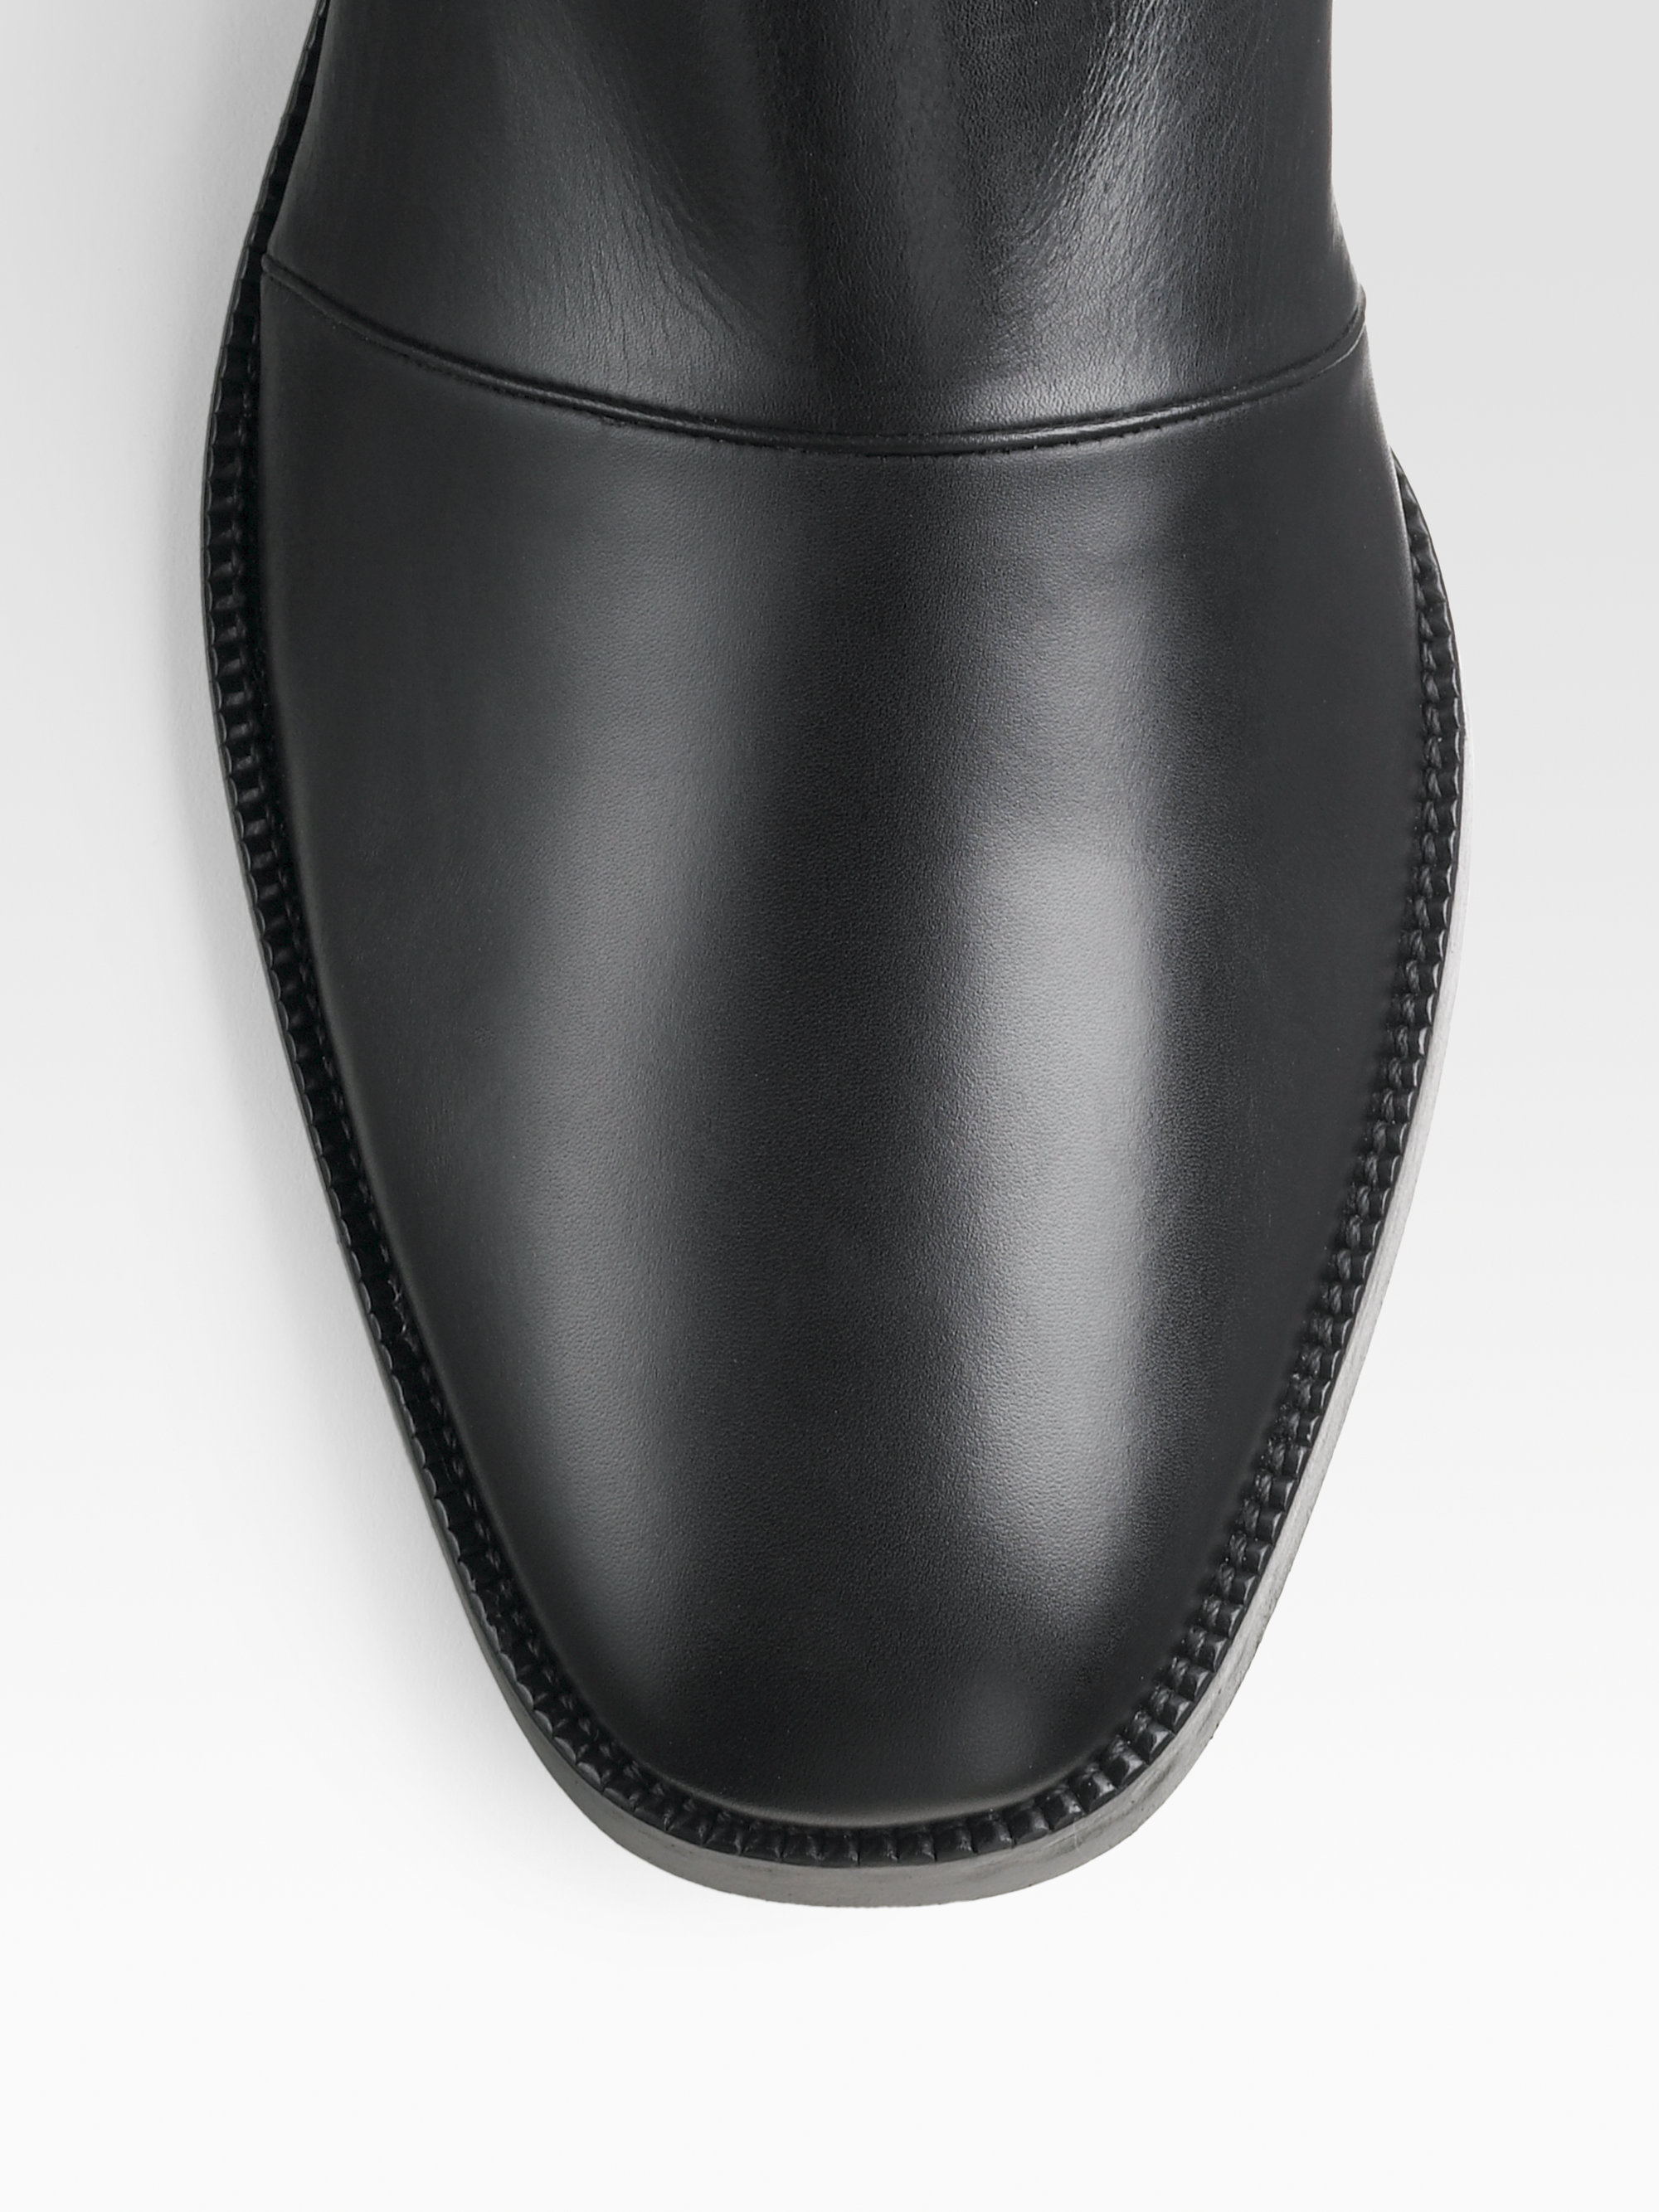 Lyst - Dior Homme Leather Boots in Black for Men